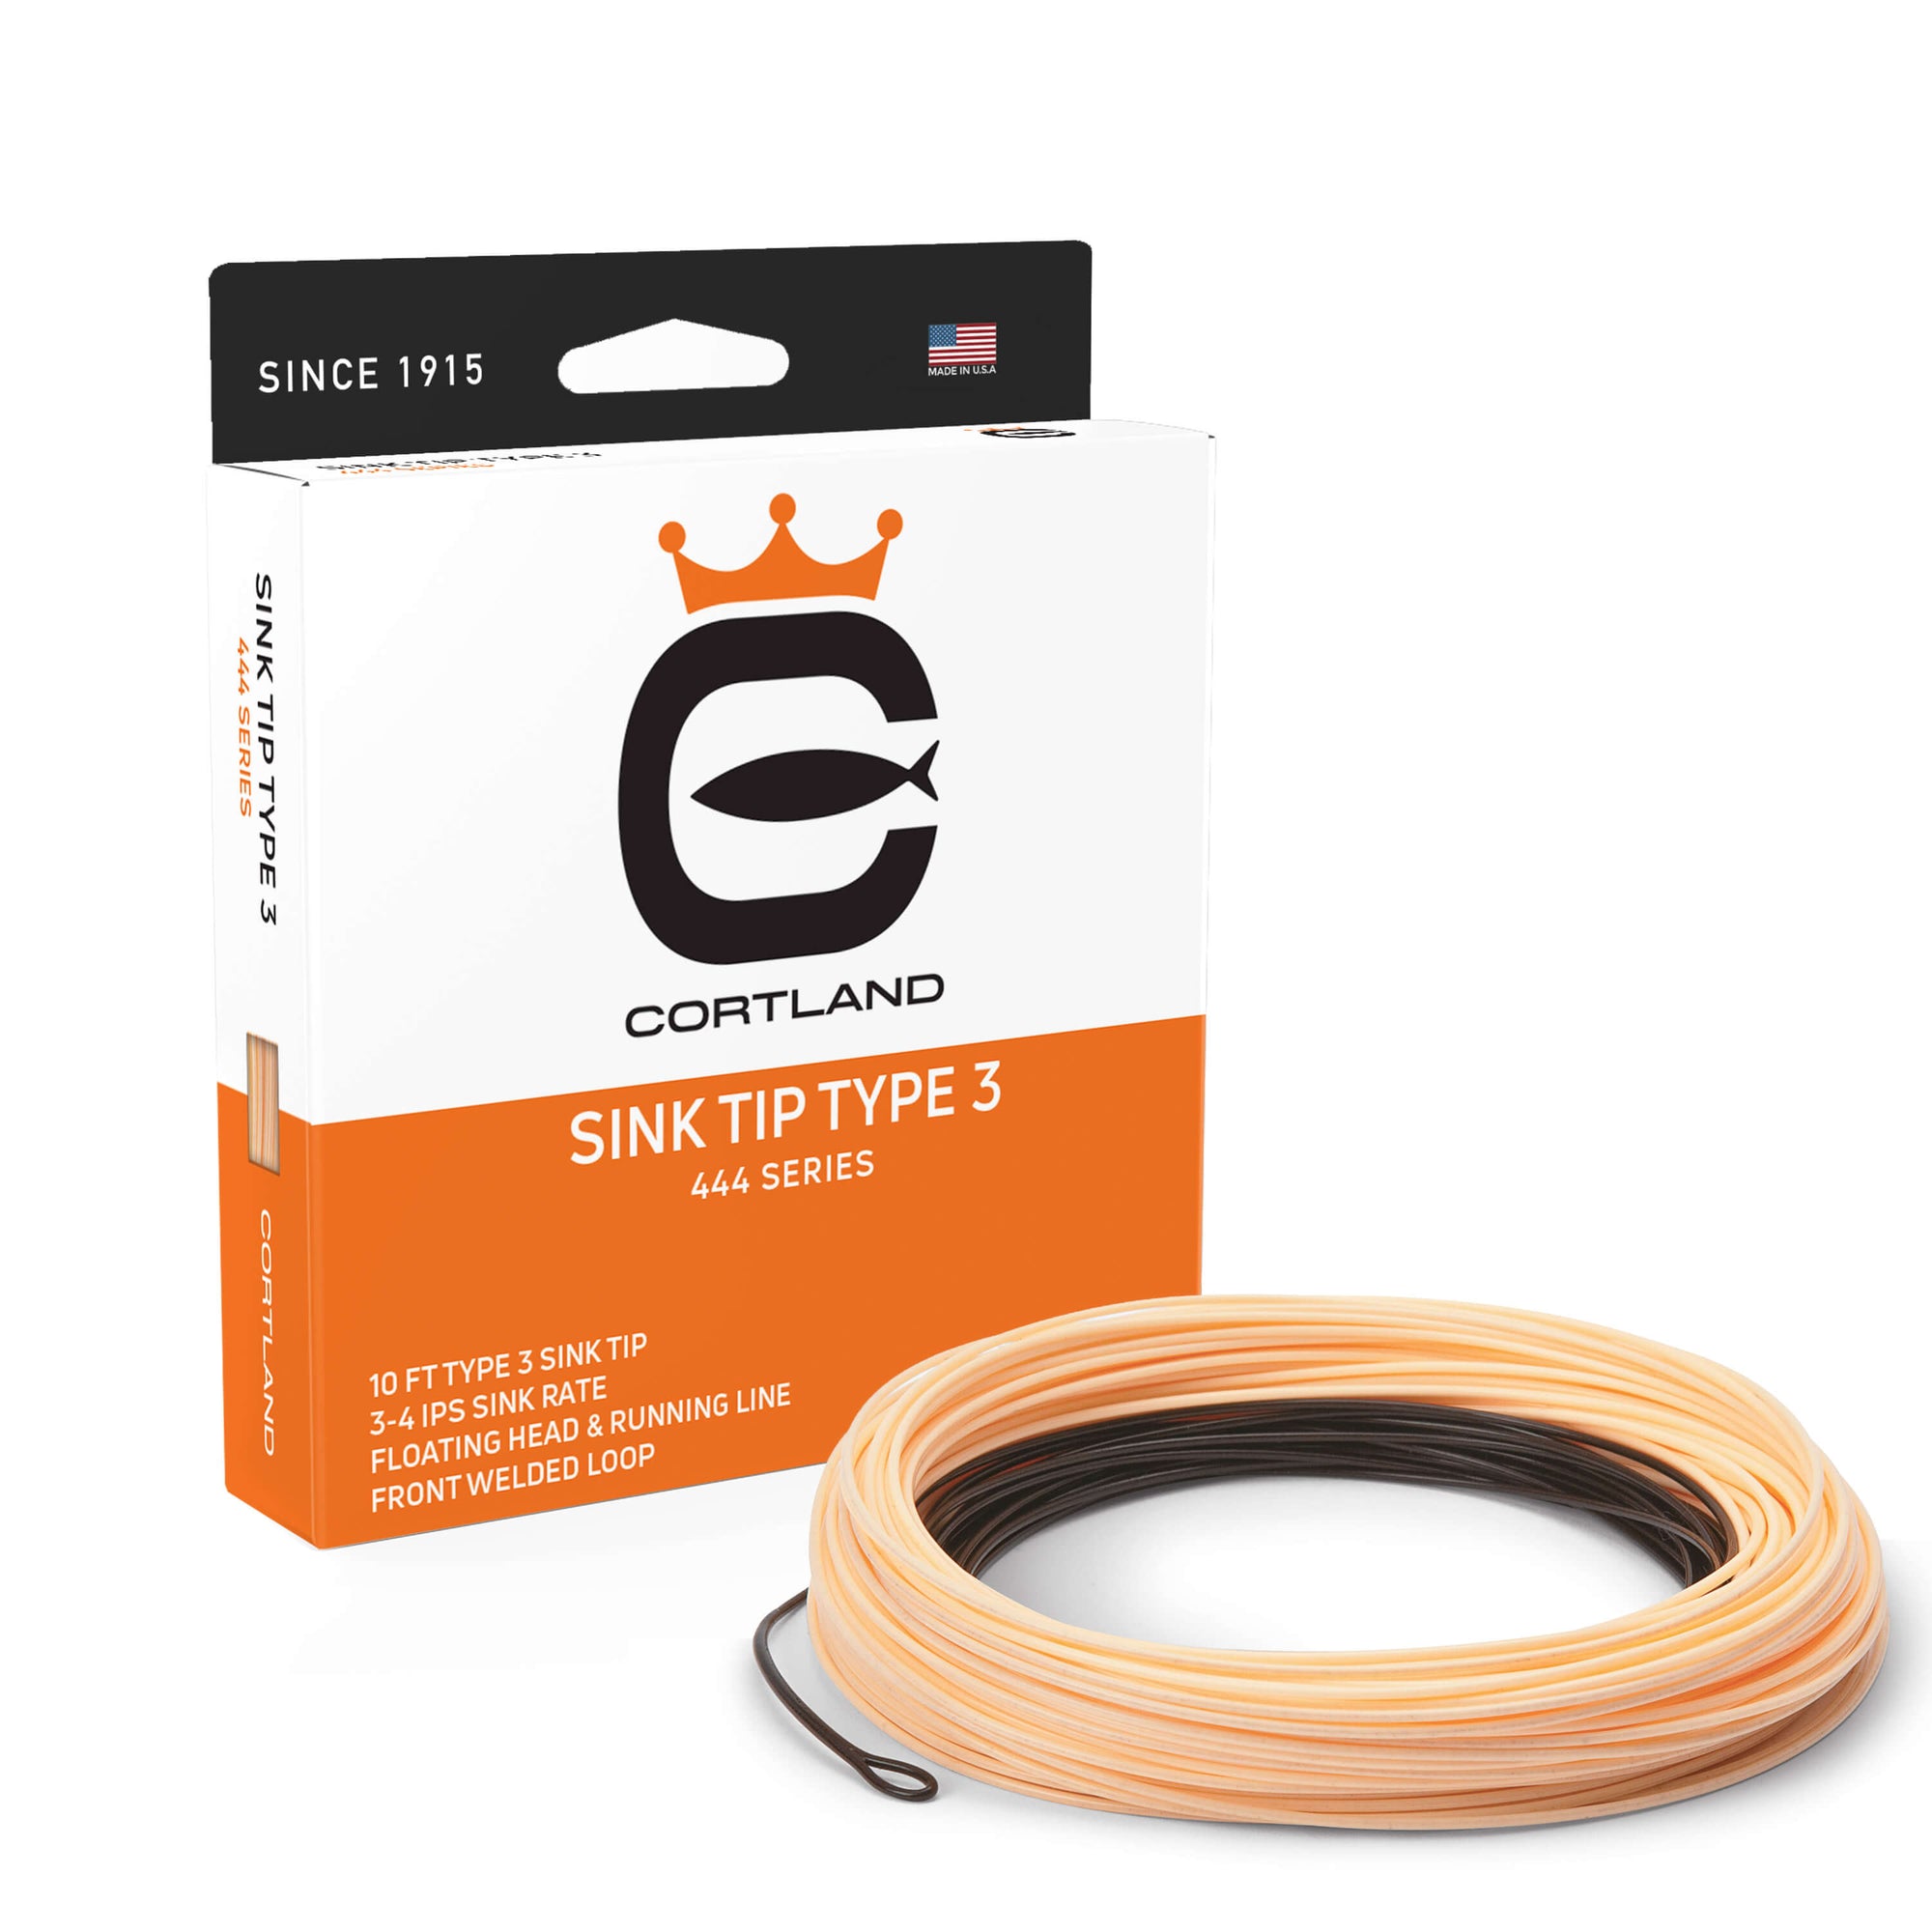 444 Series Sink Tip Type 3 Fly Line and box. The coil is brown and peach. The box is orange, white, and black. 